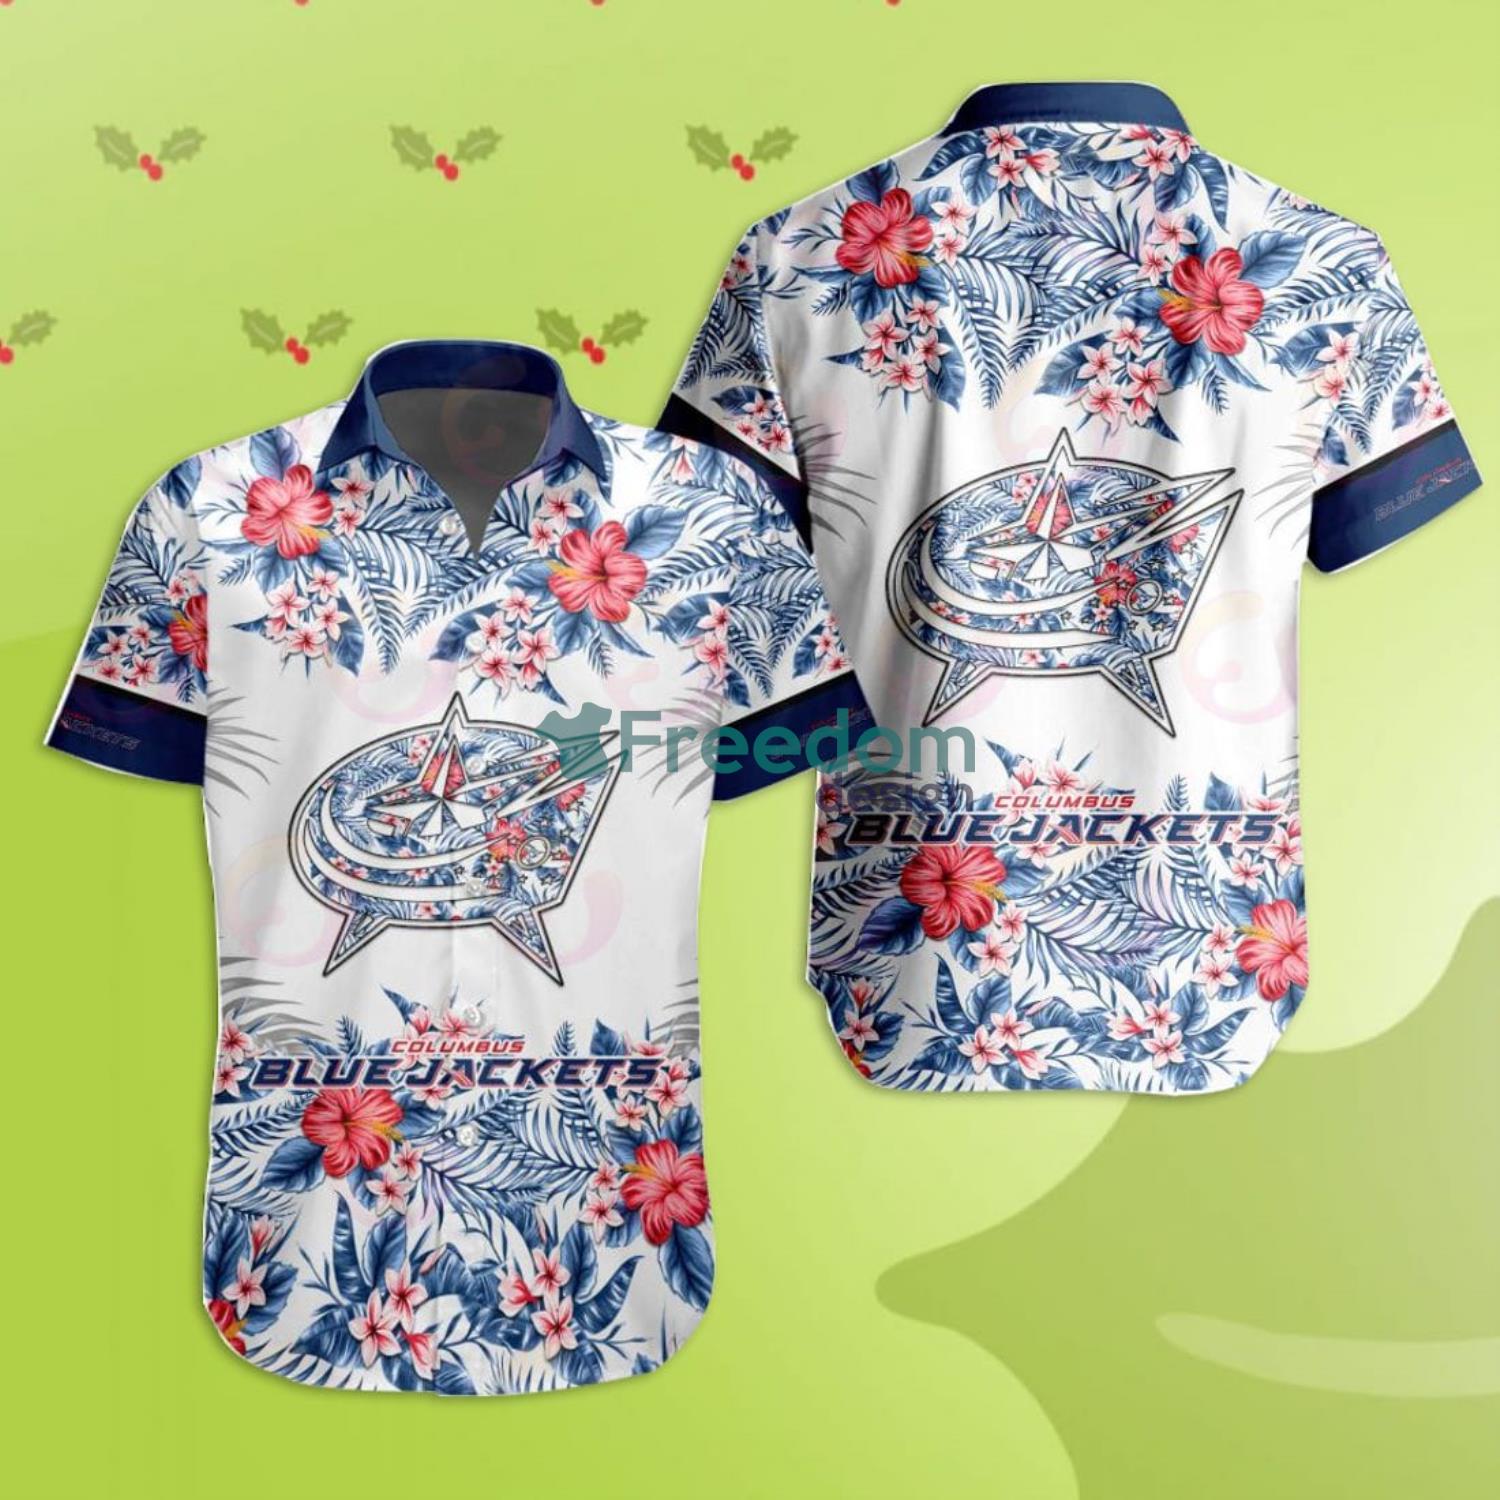 Colorado Avalanche NHL Flower Hawaiian Shirt Best Gift For Men And Women  Fans - Freedomdesign